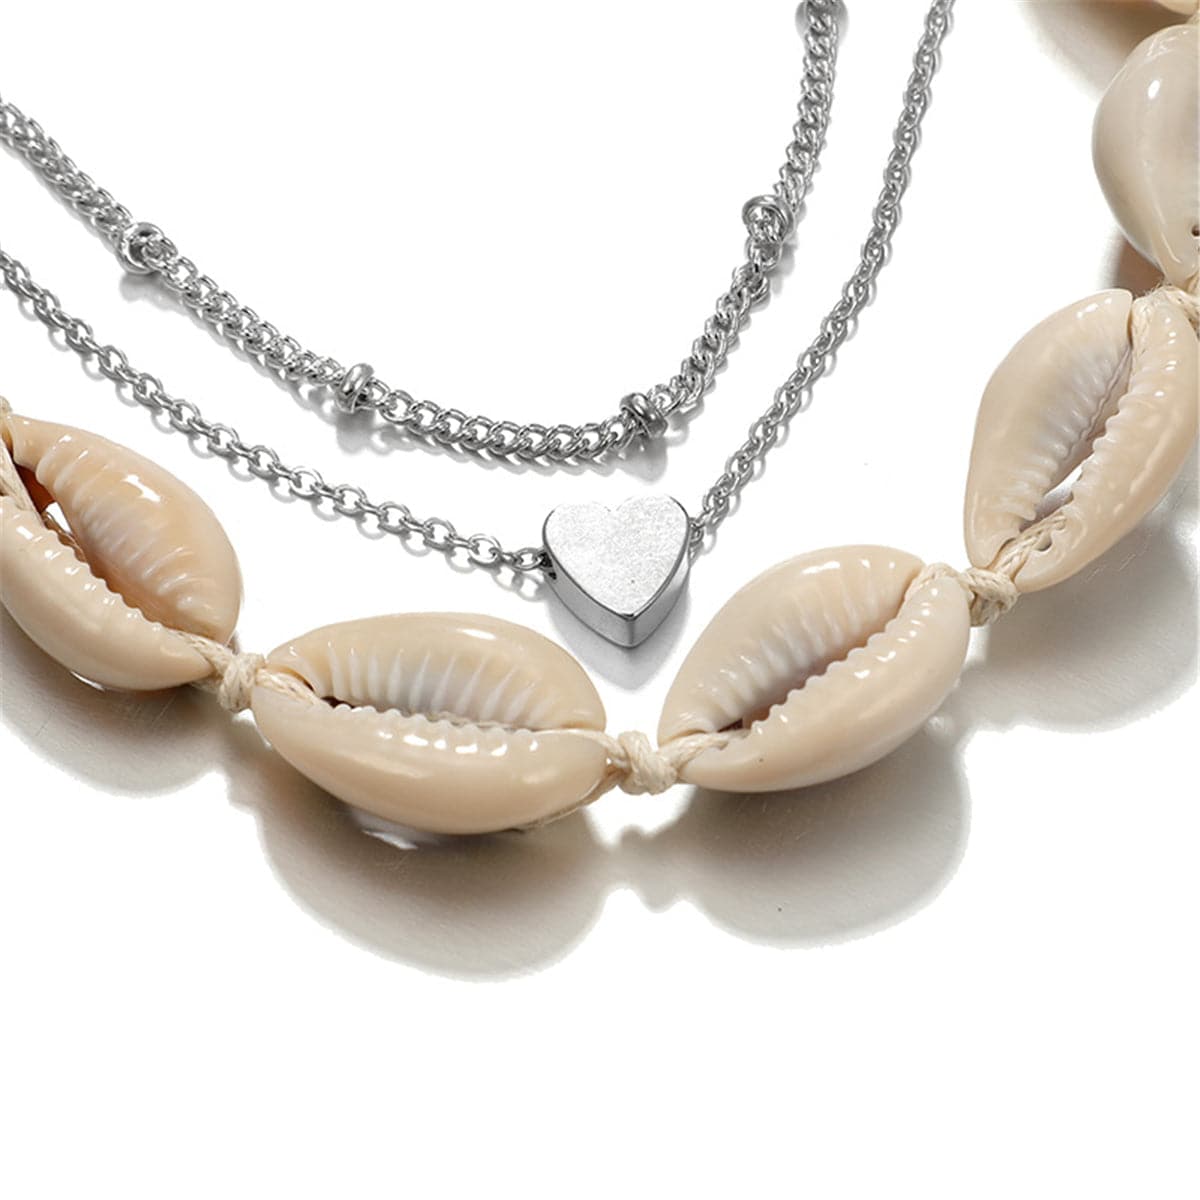 Seashell & Silver-Plated Heart Anklet Set